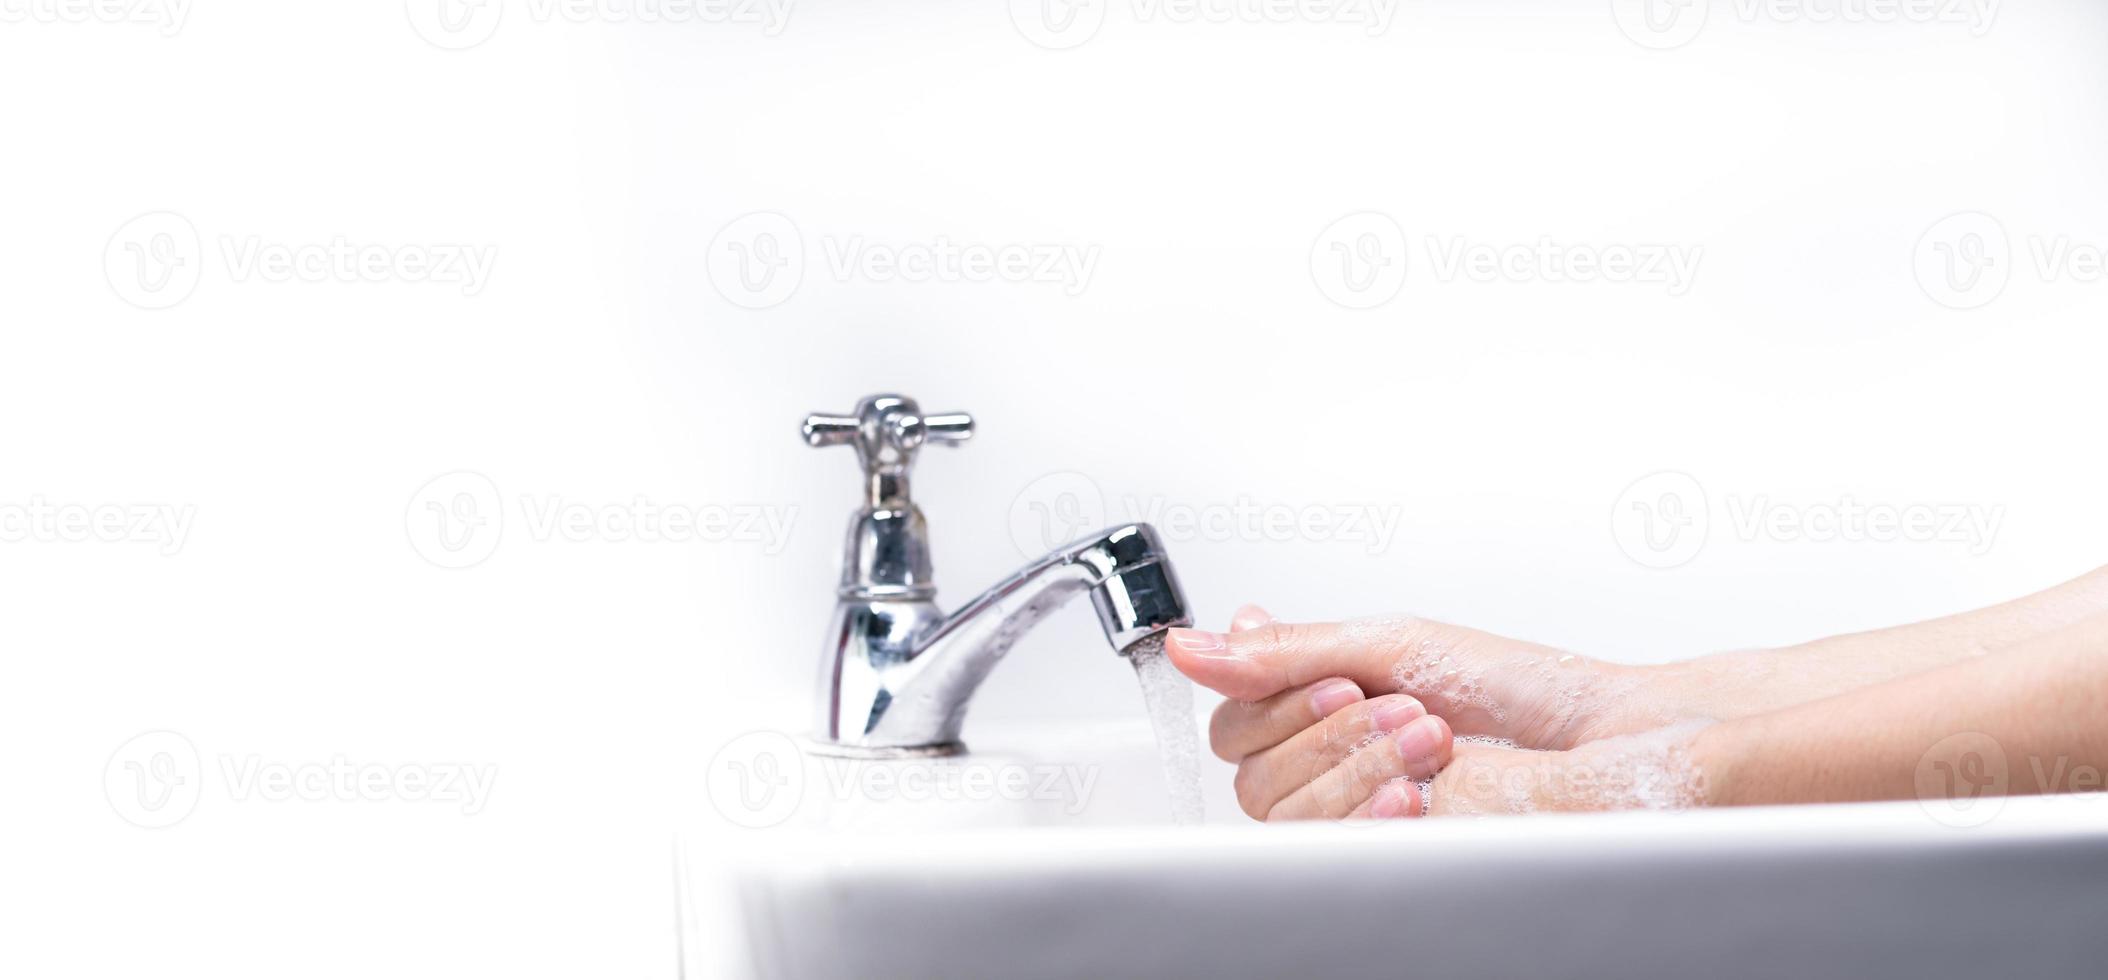 Woman washing hand with soap foam and tap water in bathroom. Hand clean under faucet on sink for personal hygiene to prevent flu and coronavirus. Good procedure of hand wash to kill bacteria, virus. photo